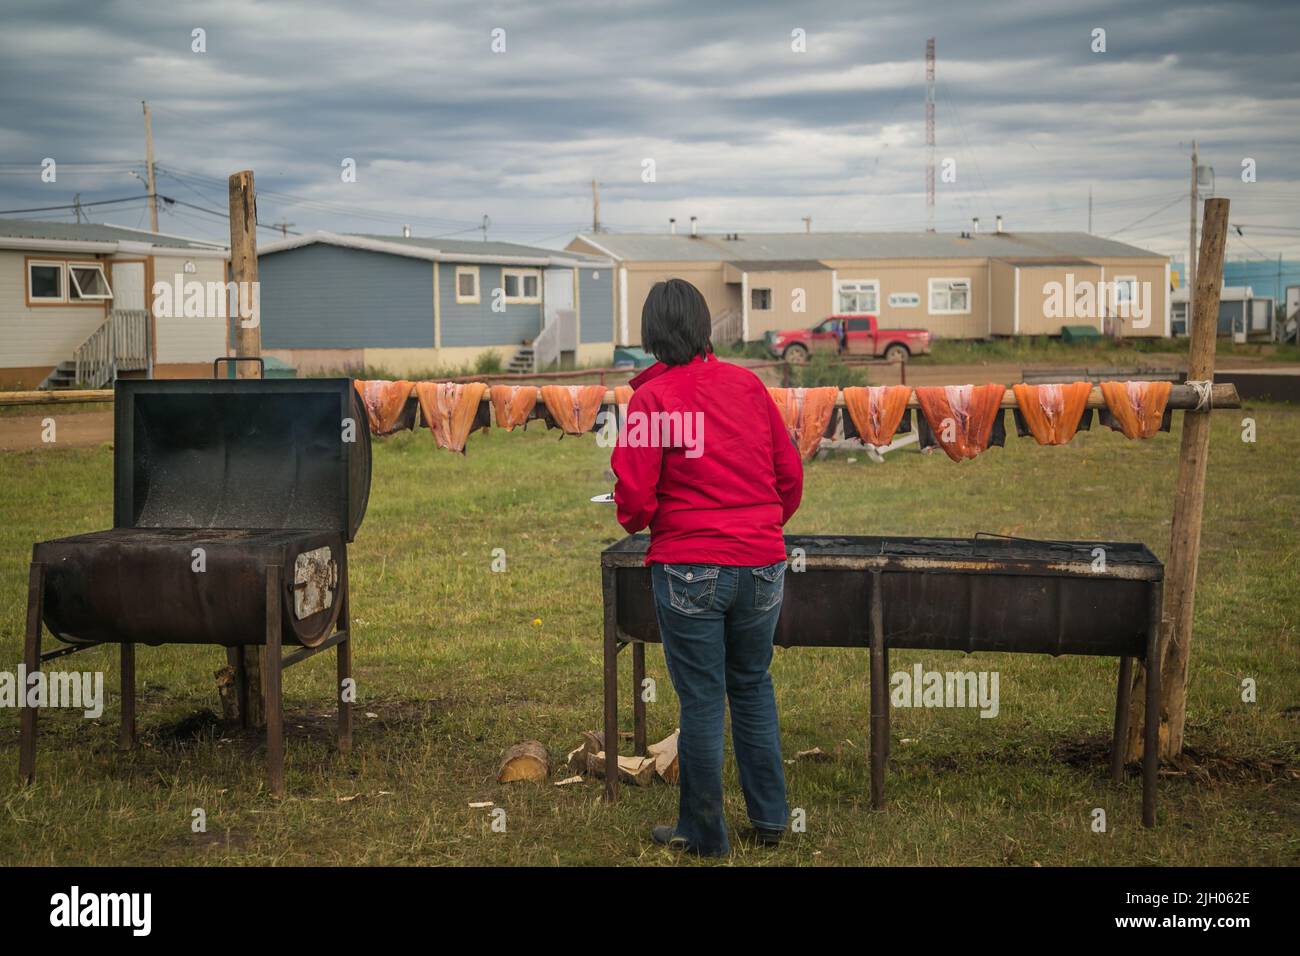 Woman monitoring the fillets of Lake Trout being smoked above fire in the northern Indigenous community of Deline, Northwest Territories, Canada. This Stock Photo